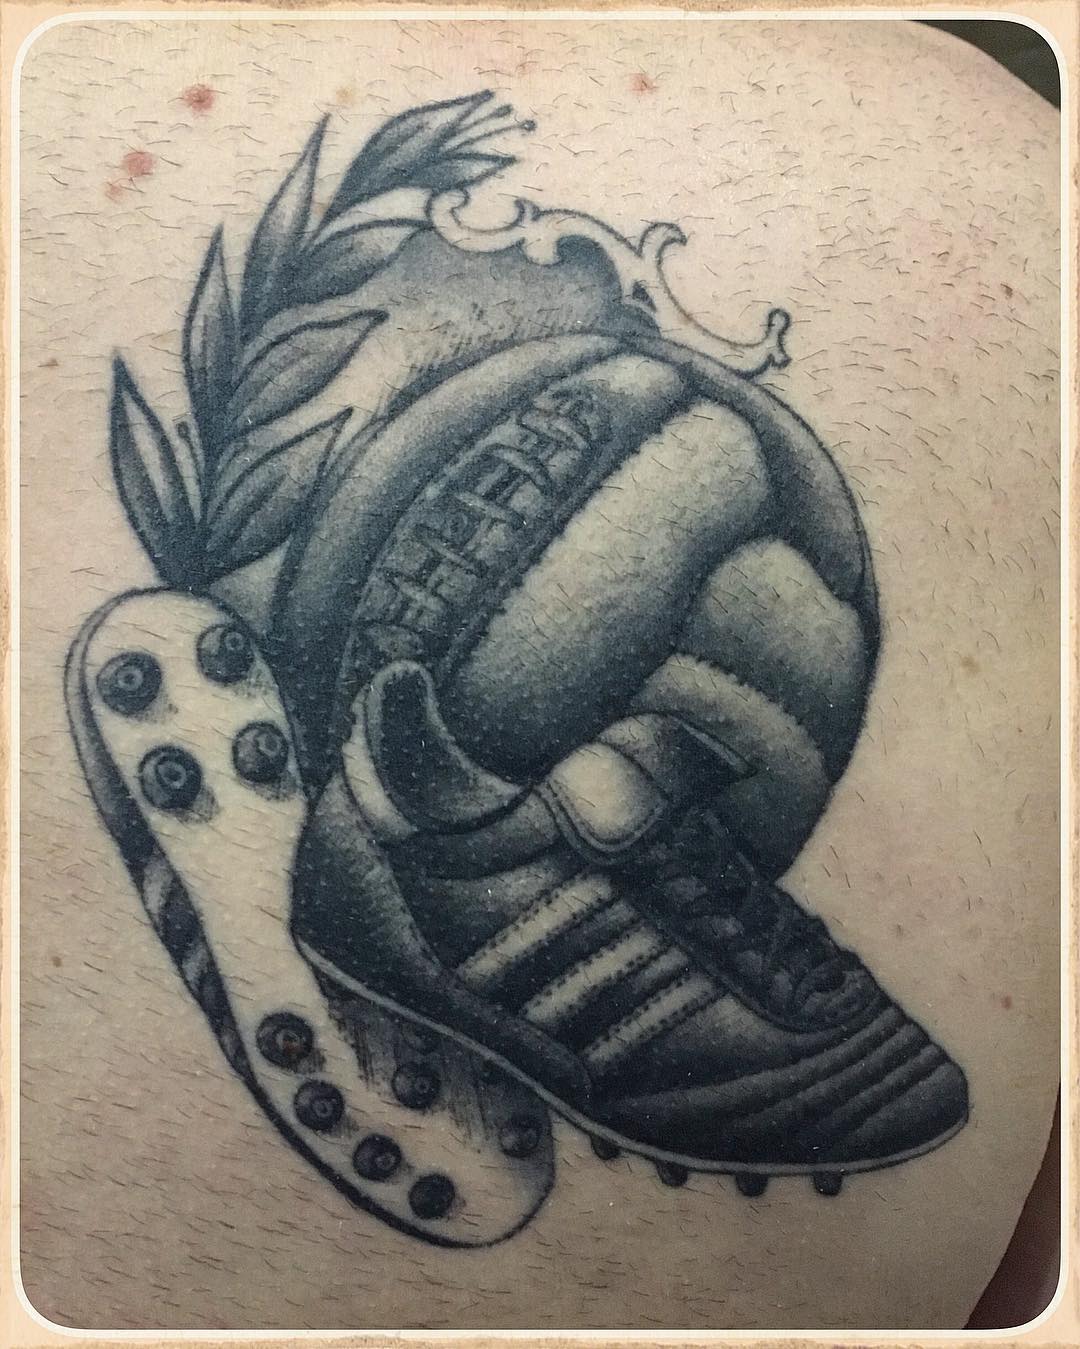 another healed soccer piece, i ve done 1 year ago, 
thanks alex for visit me yes